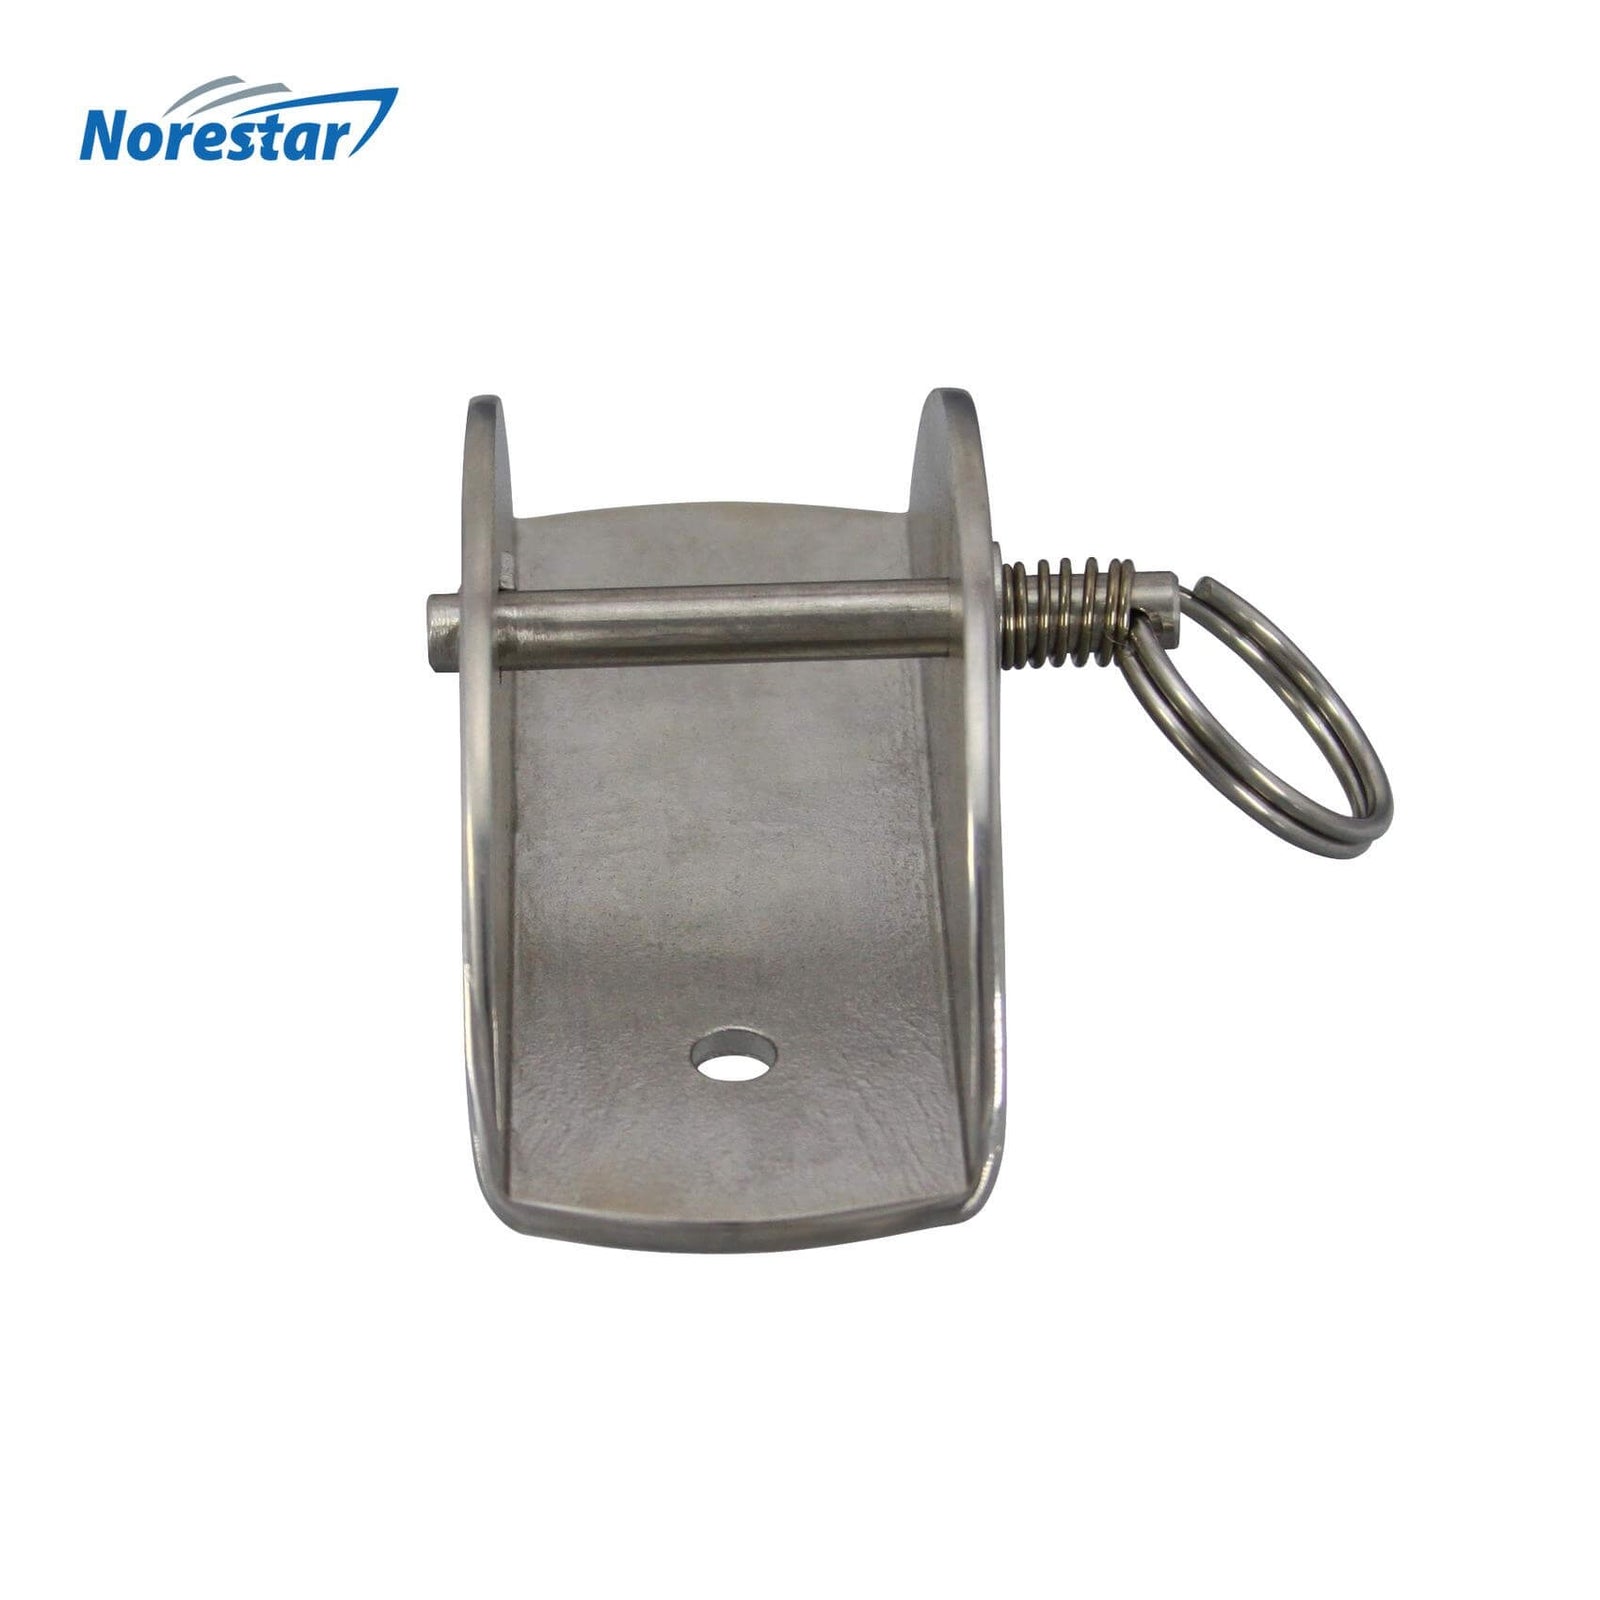 https://www.anchoring.com/cdn/shop/products/norestar-acl-0-stainless-steel-anchor-lock-front-angle-locked-spring-right-with-logo_1600x.jpg?v=1523312431